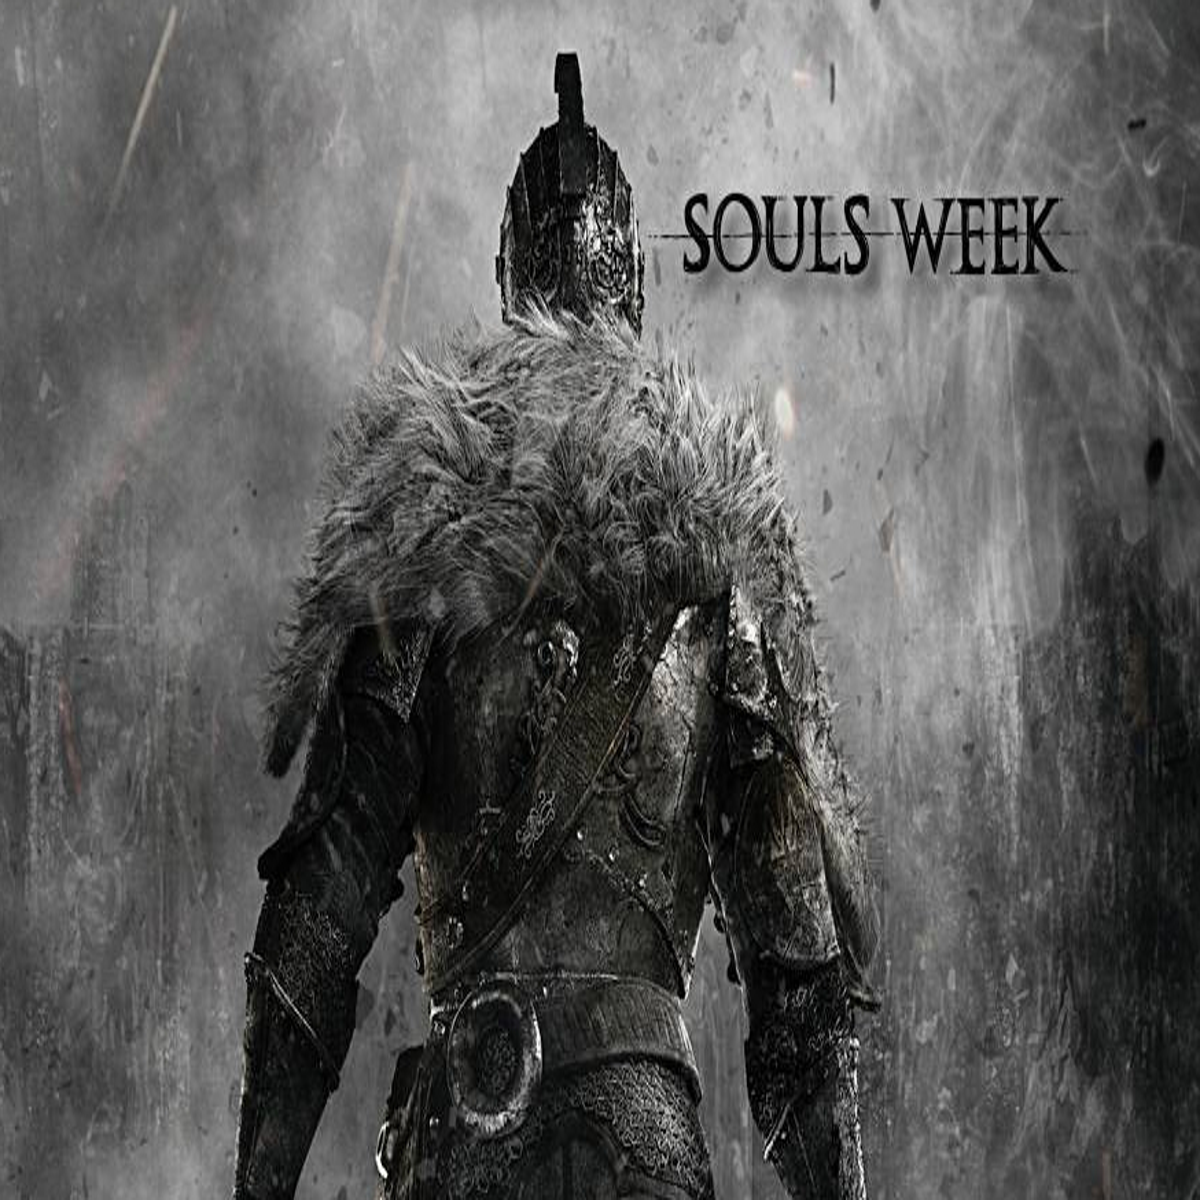 Review: 'Dark Souls 2' is really hard, and really terrific – The Mercury  News